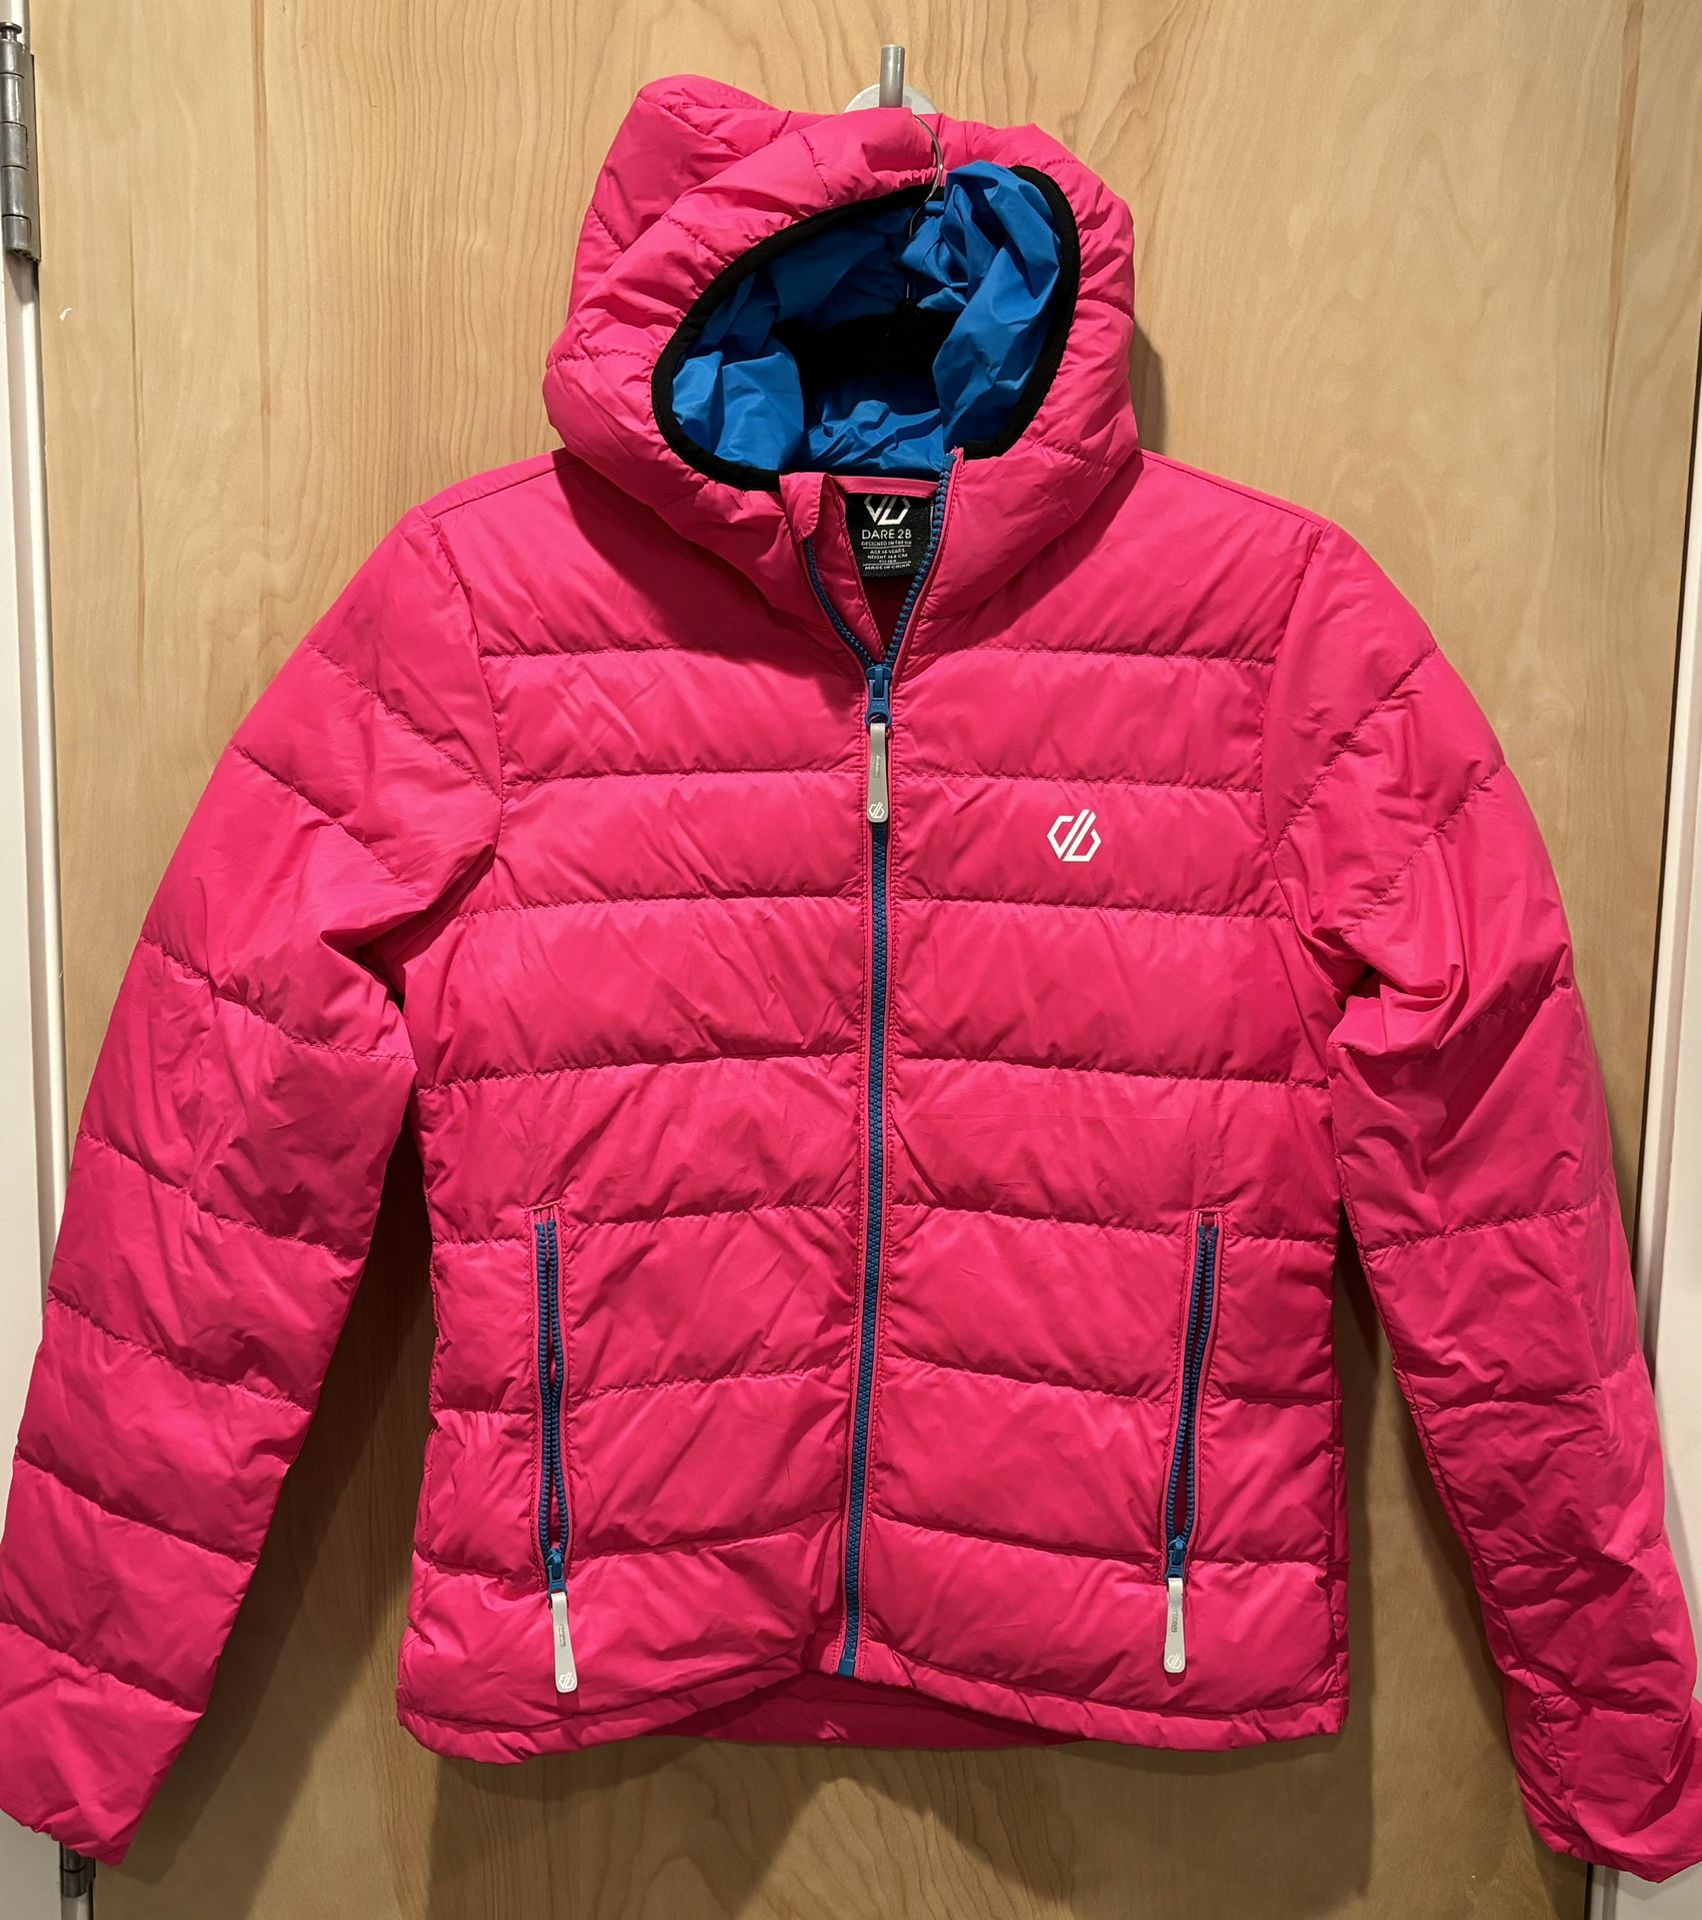 KIDS DARE 2B PINK HOODED JACKET LIGHT WEIGHT 14 YEARS SIZE 